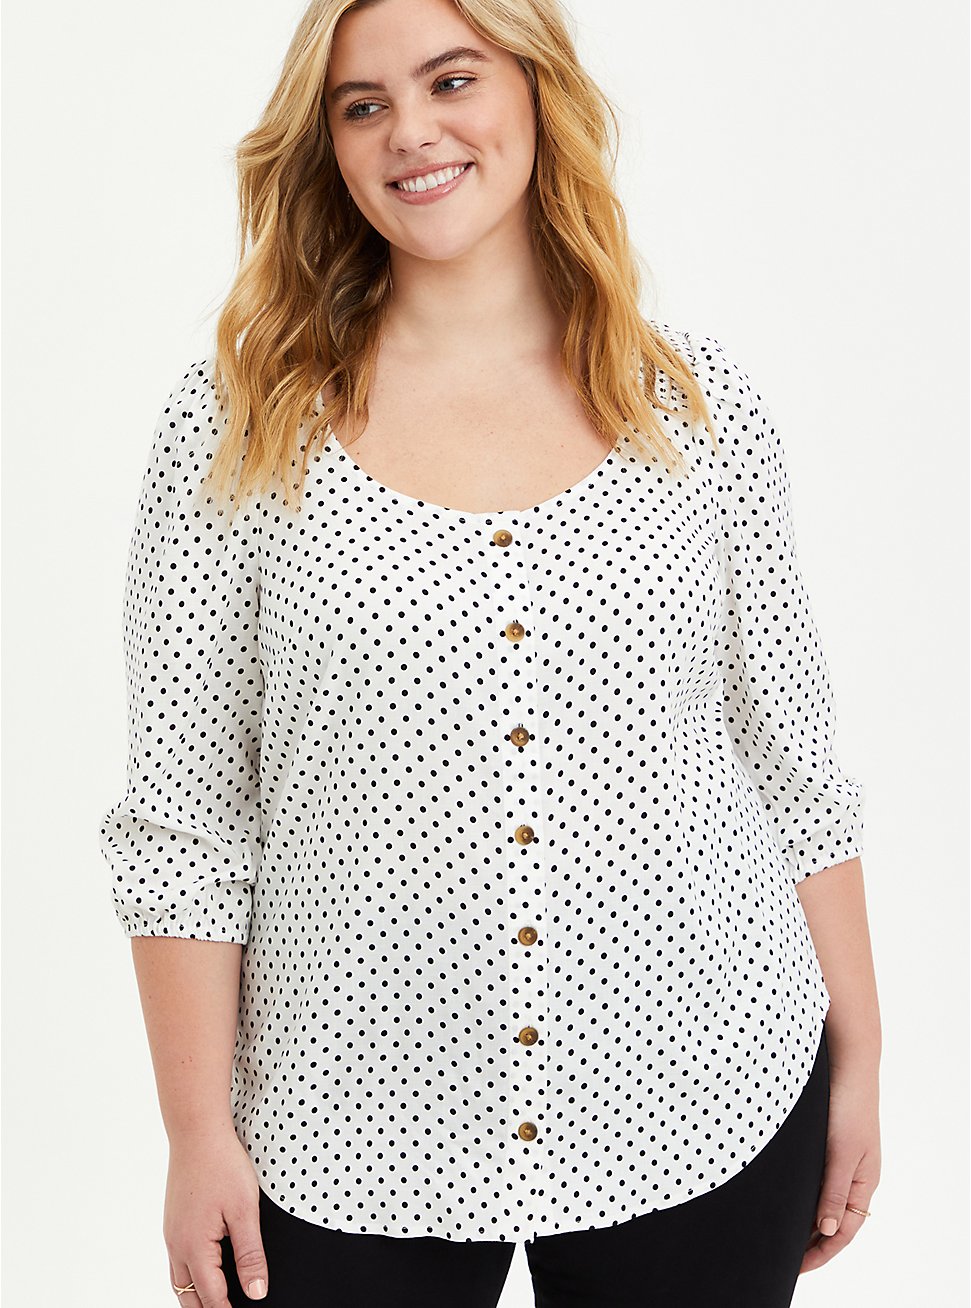 White & Black Polka Dot Button-Front Puff Sleeve Woven Top, DOTS - BLACK, hi-res